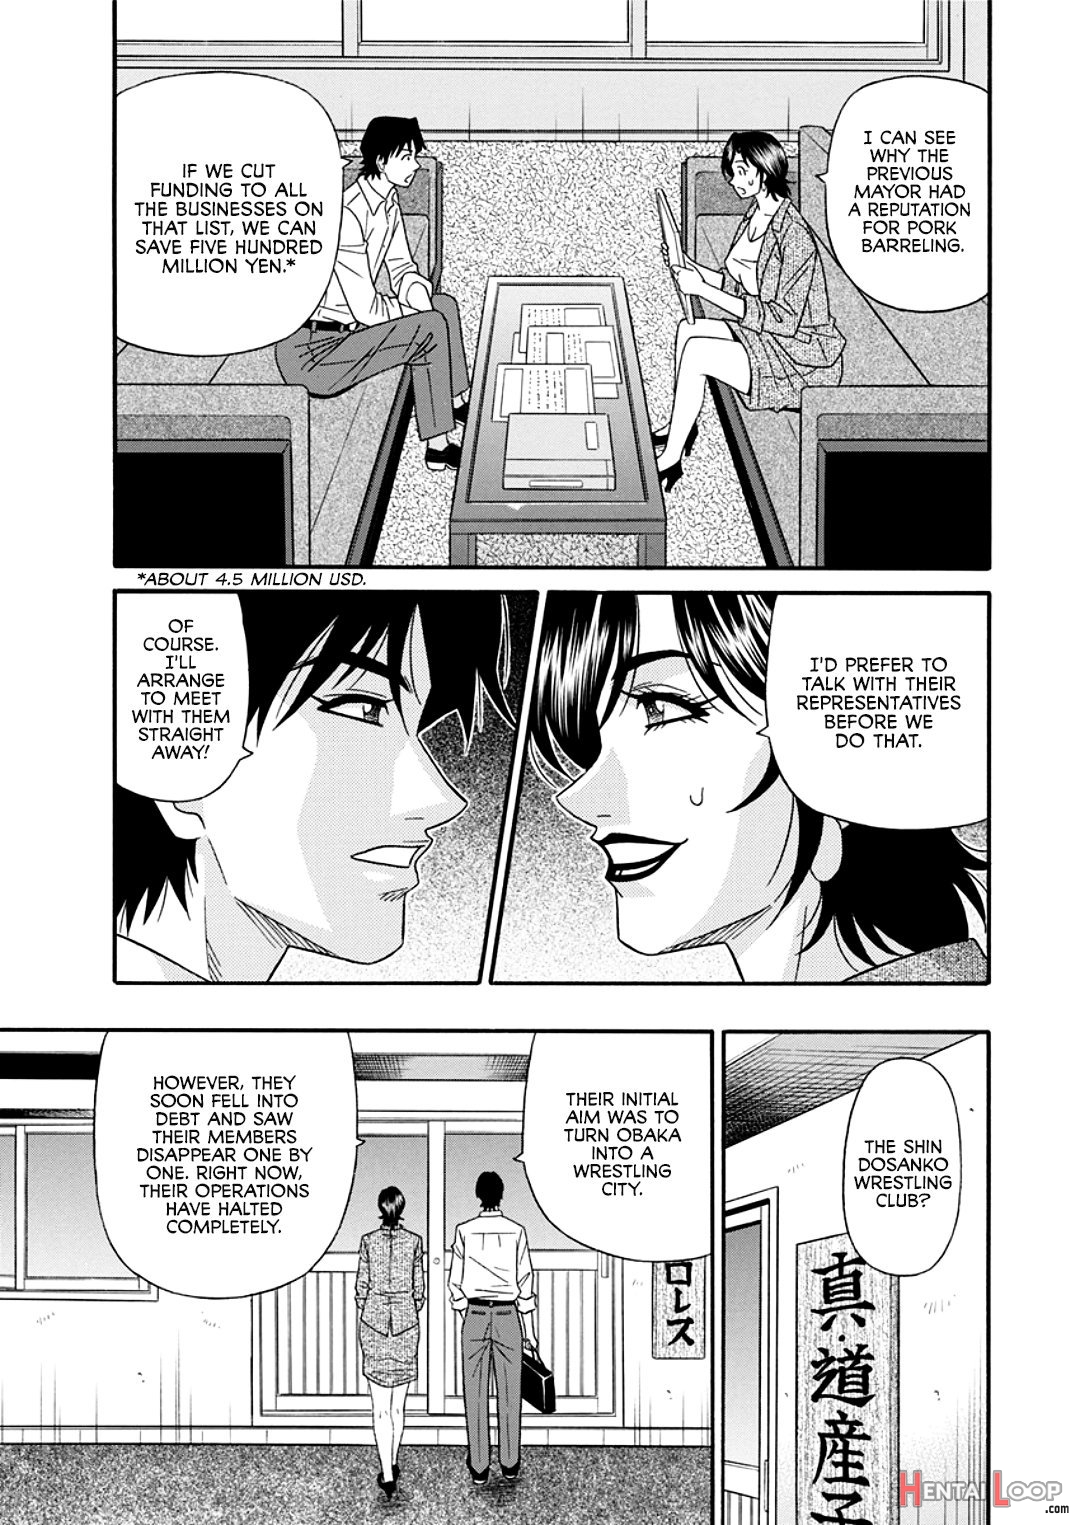 Married Major's Sexy Reform Ch. 1-5 page 7